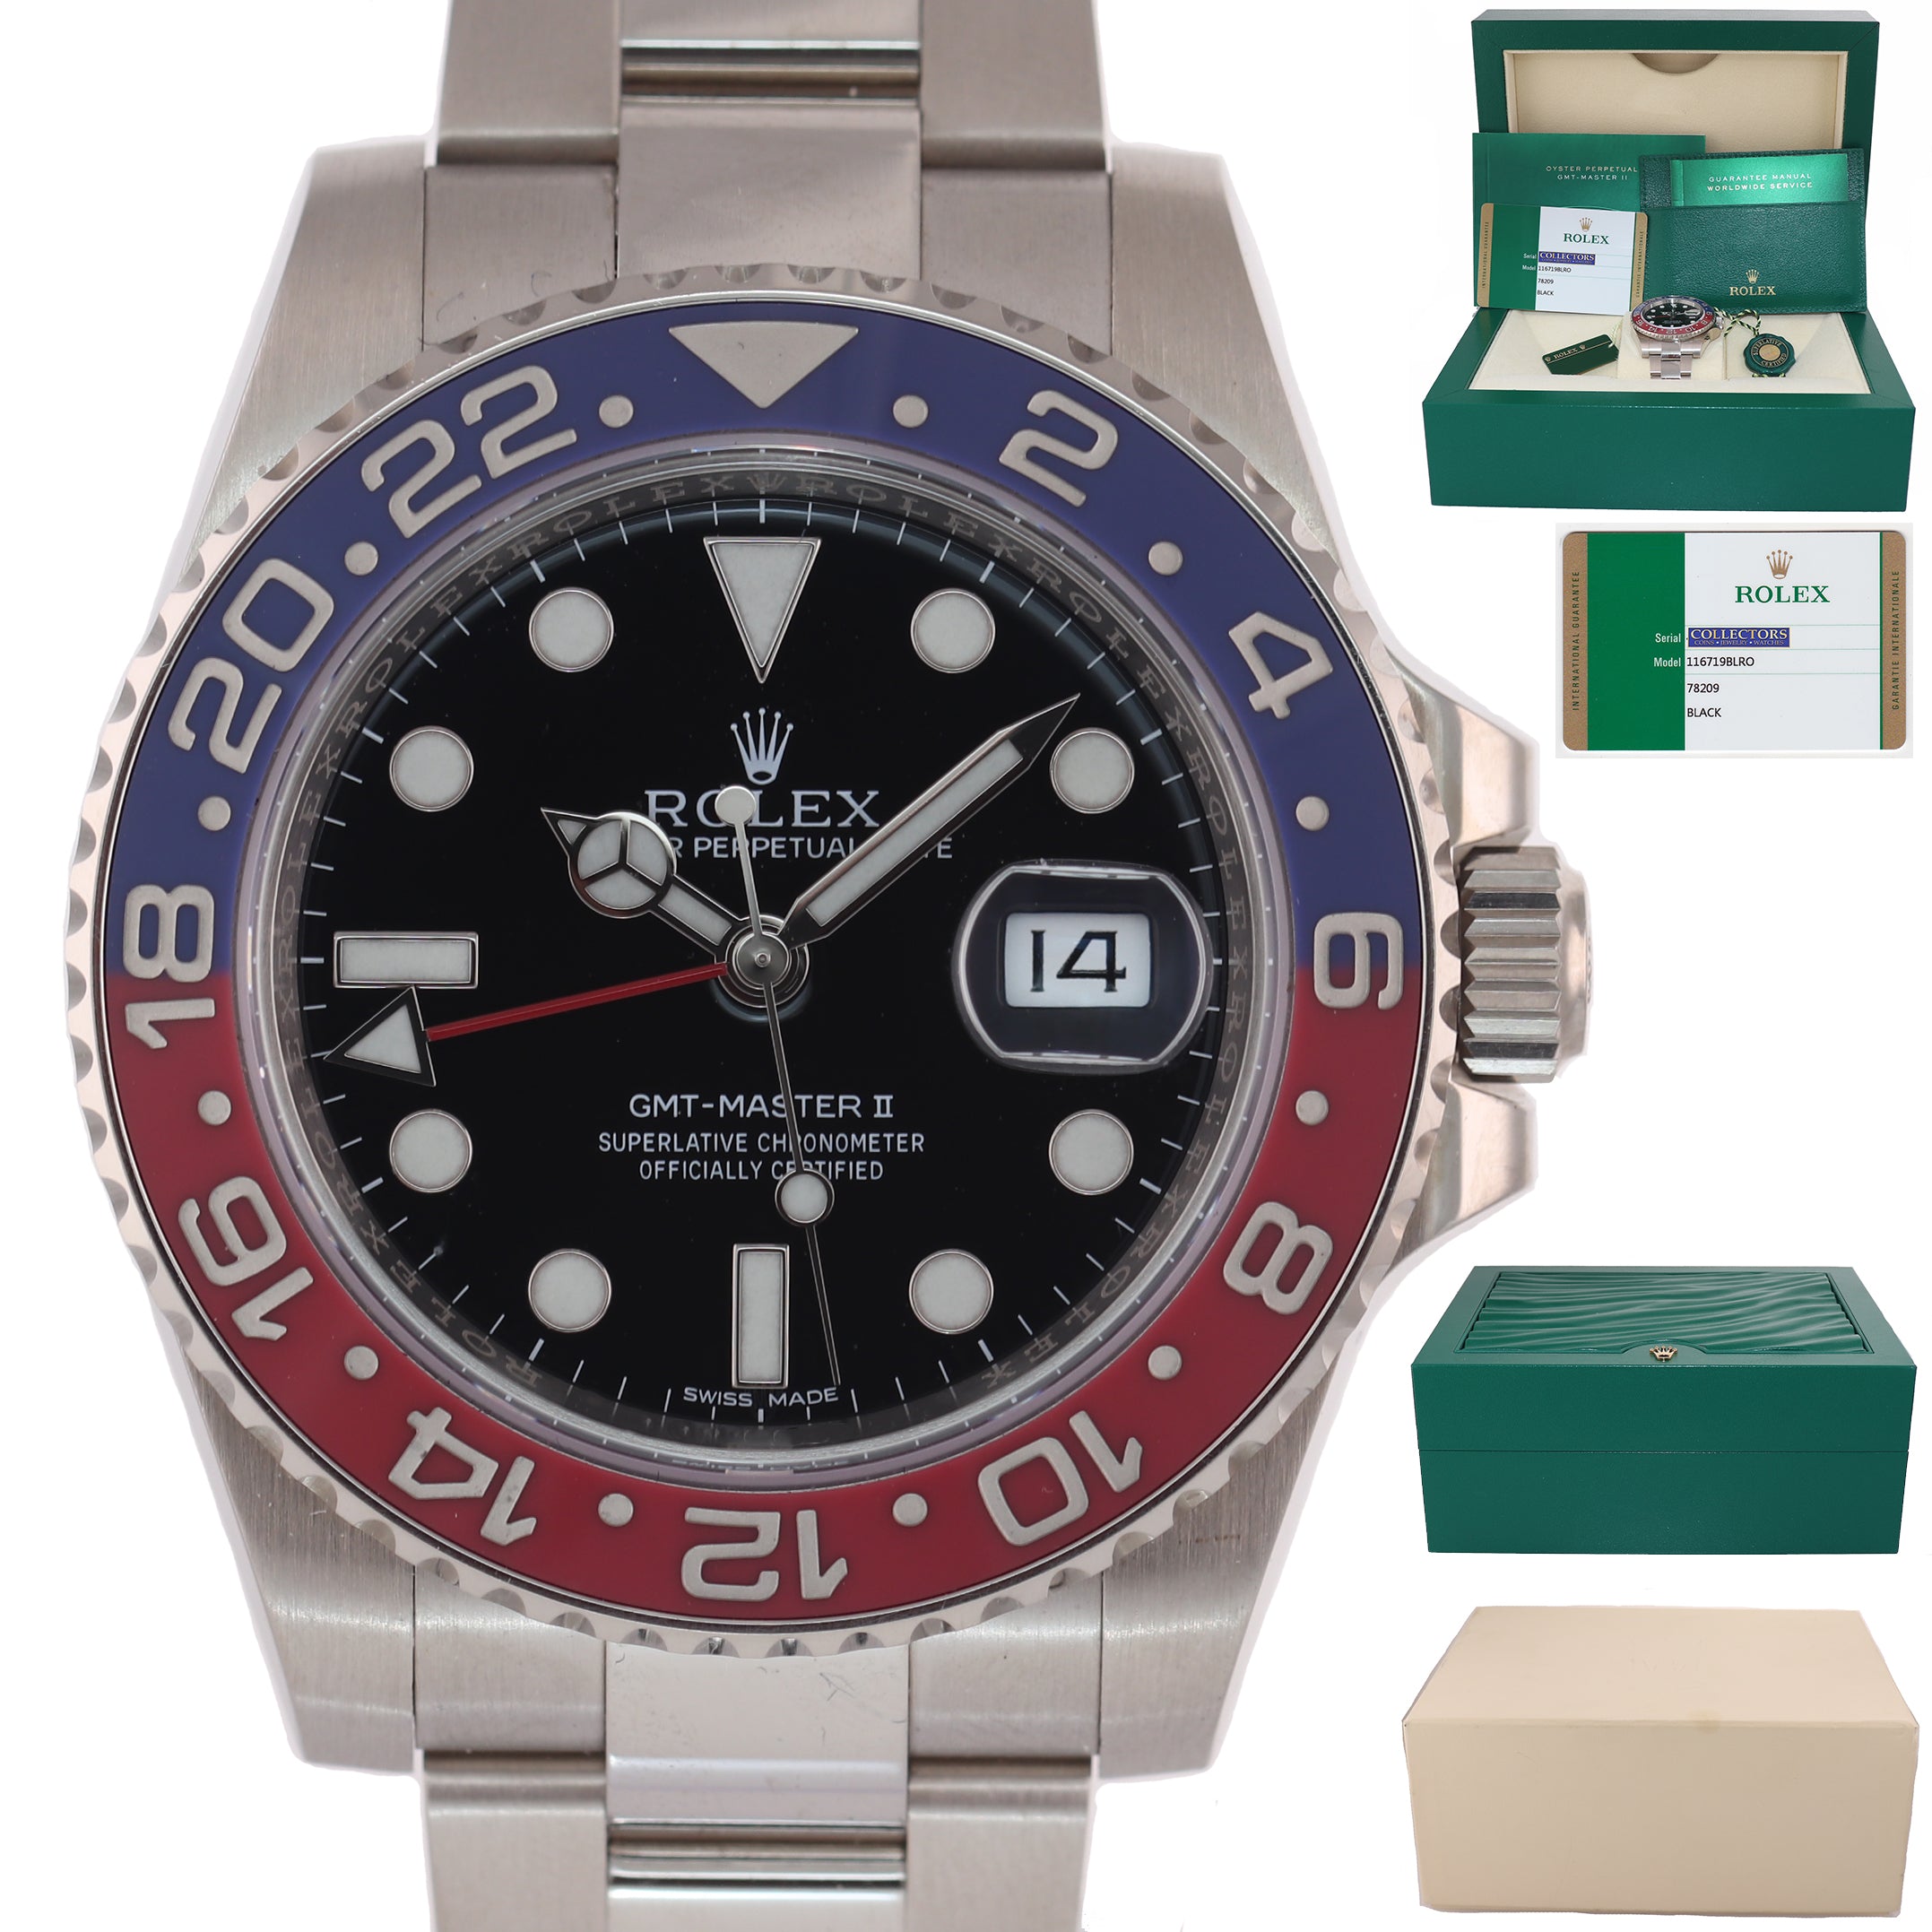 MINT PAPERS Rolex GMT-Master 2 Pepsi 18K White Gold 116719 40mm BLRO Watch Box